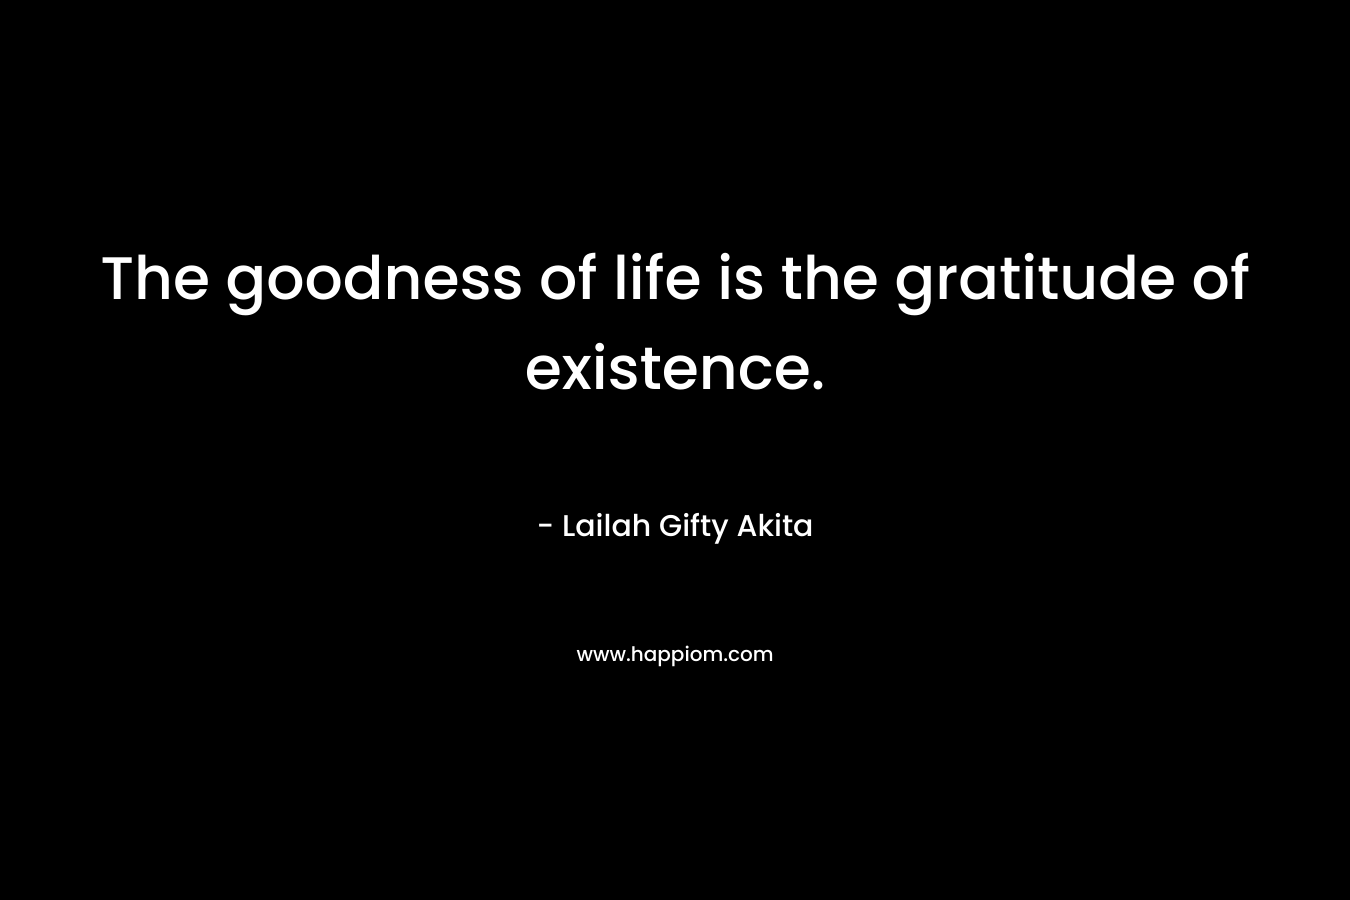 The goodness of life is the gratitude of existence.